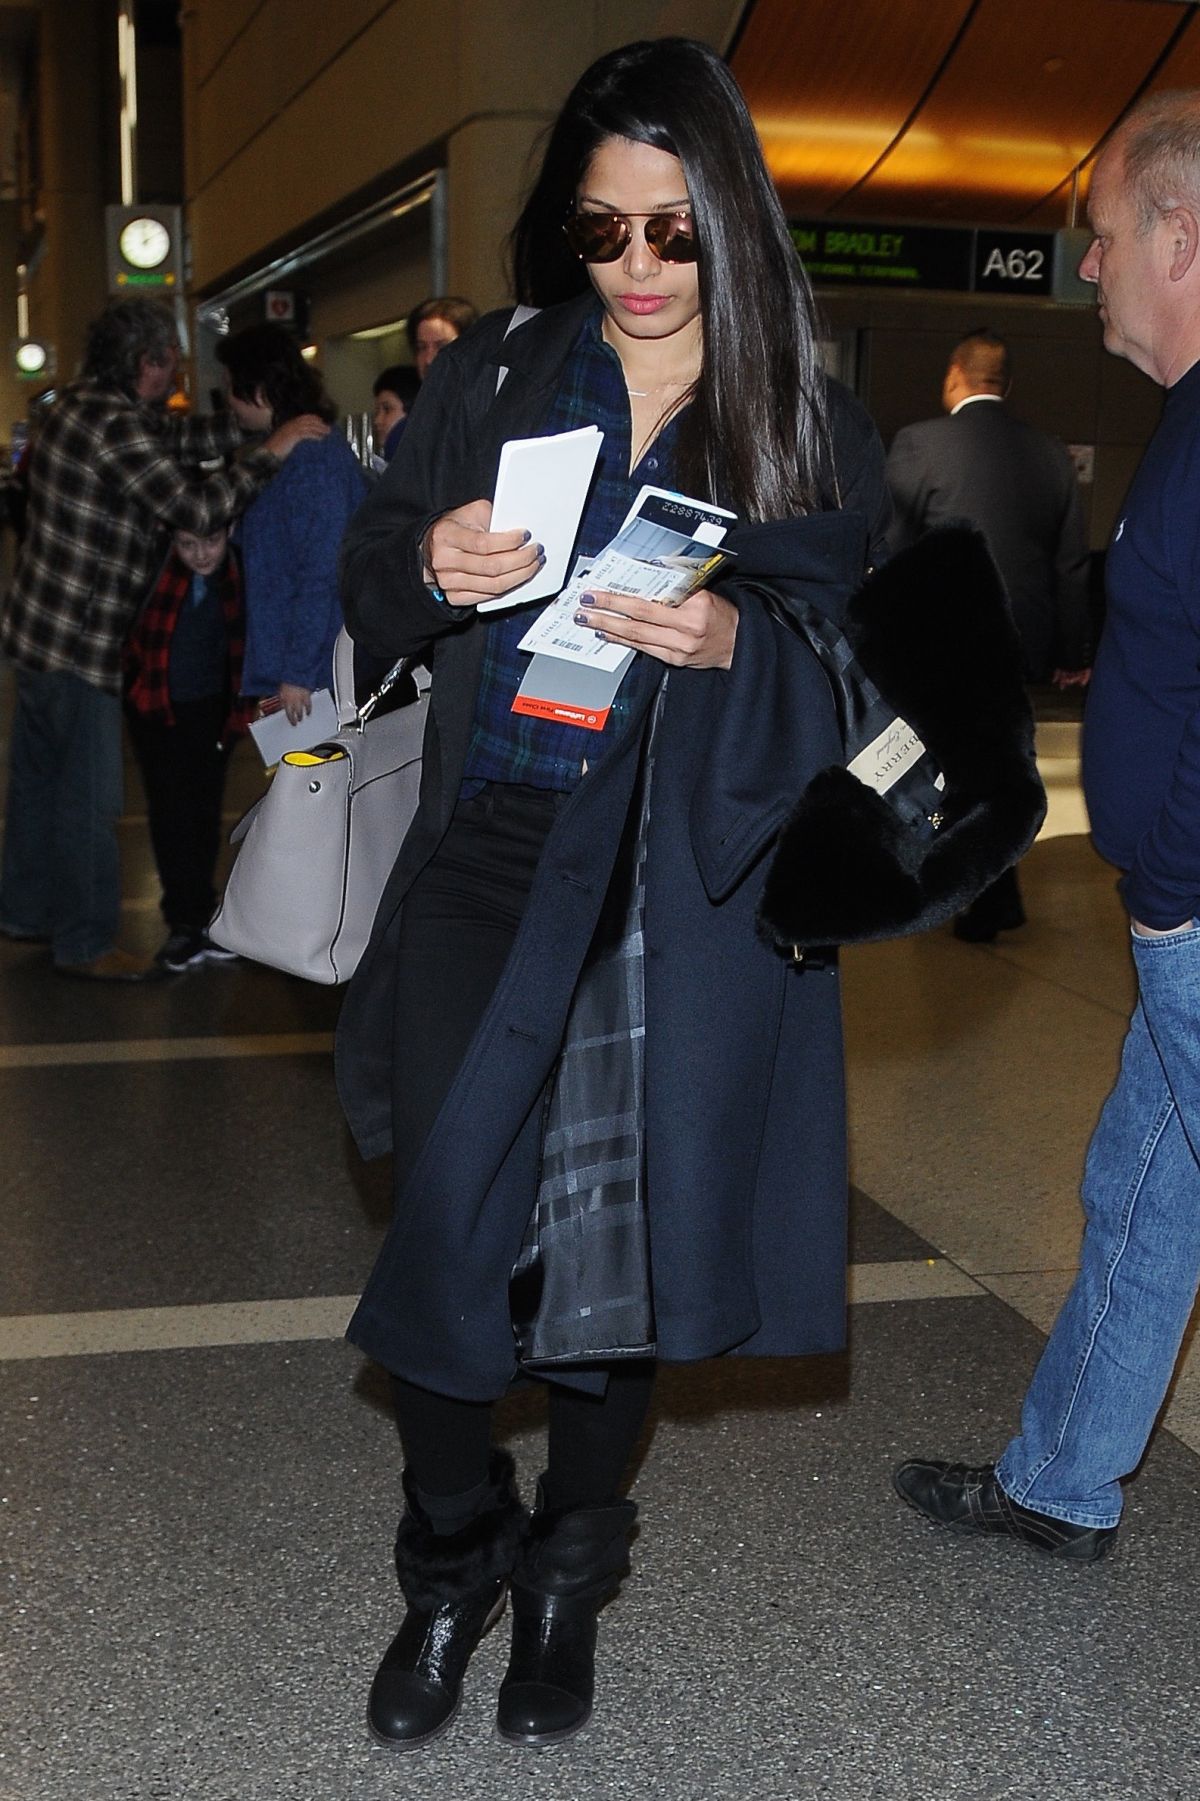 FREIDA PINTO at LAX Airport in Los Angeles 02/04/2017 – HawtCelebs